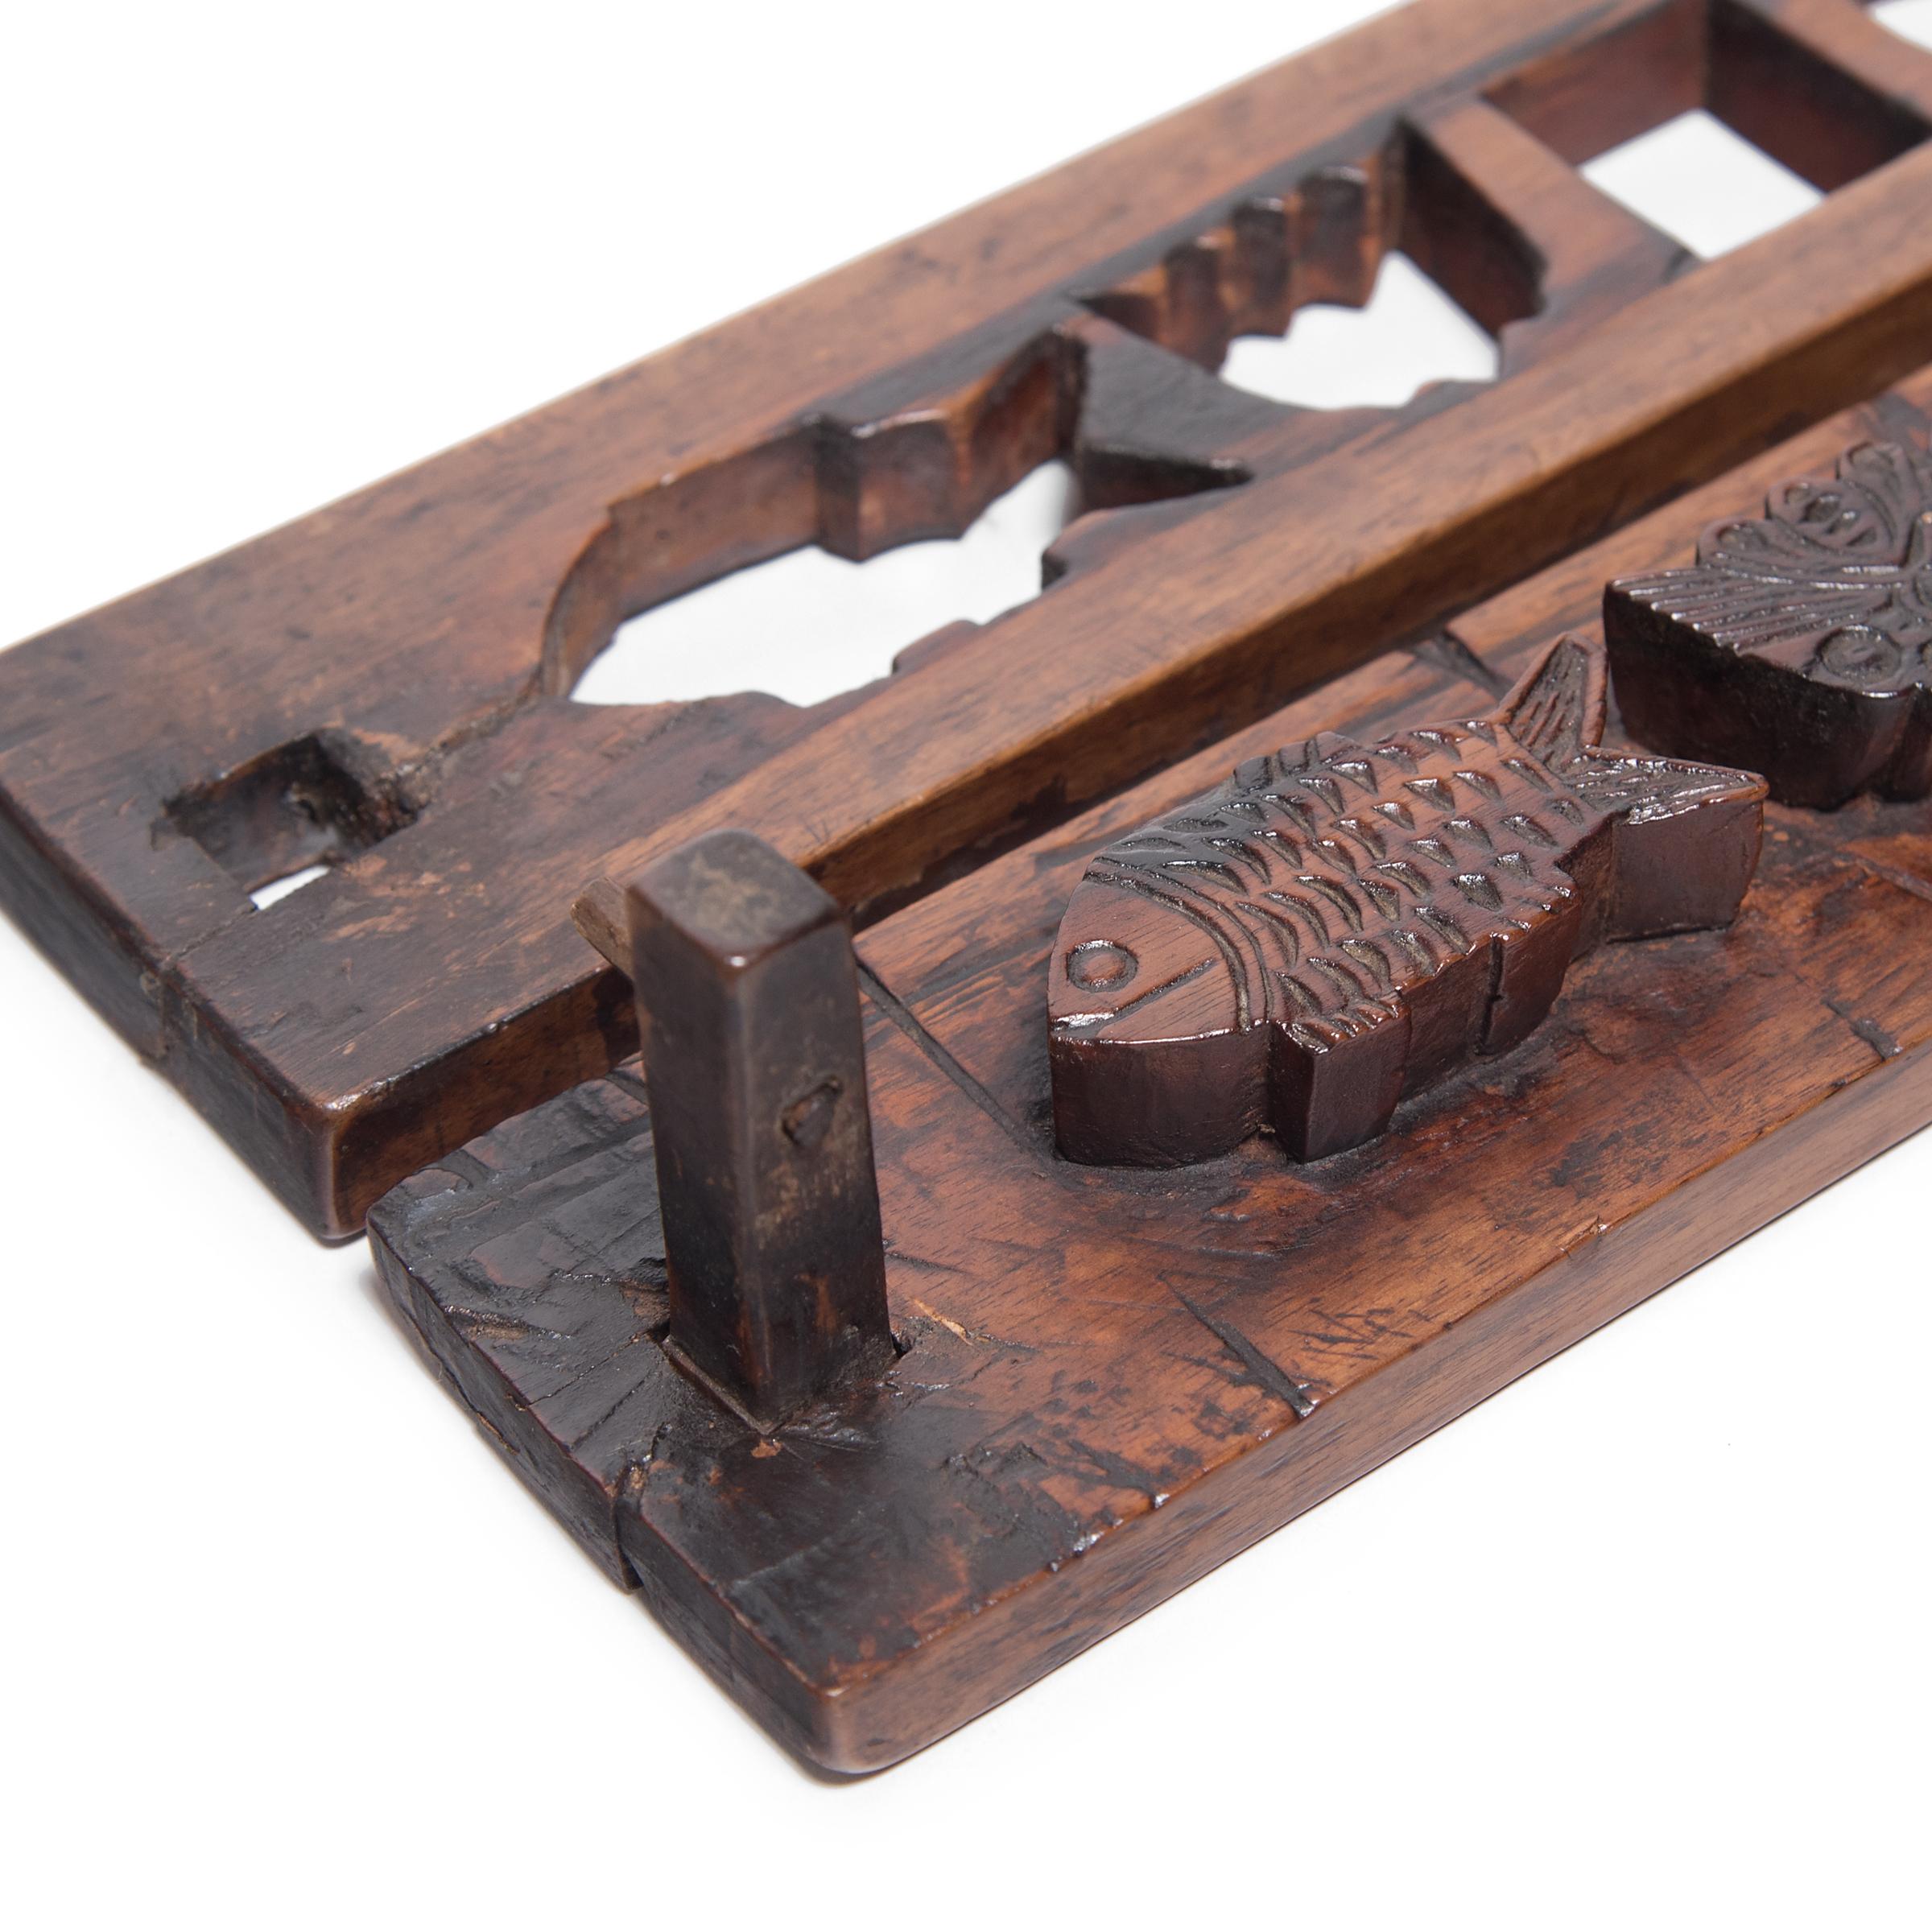 Dated to the mid-19th century, this rustic wood press is carved with seven unique molds used for shaping festive mooncakes. Packed with lotus root, red bean, or other regional fillings, mooncakes are a delicacy eaten during the Mid-Autumn Festival